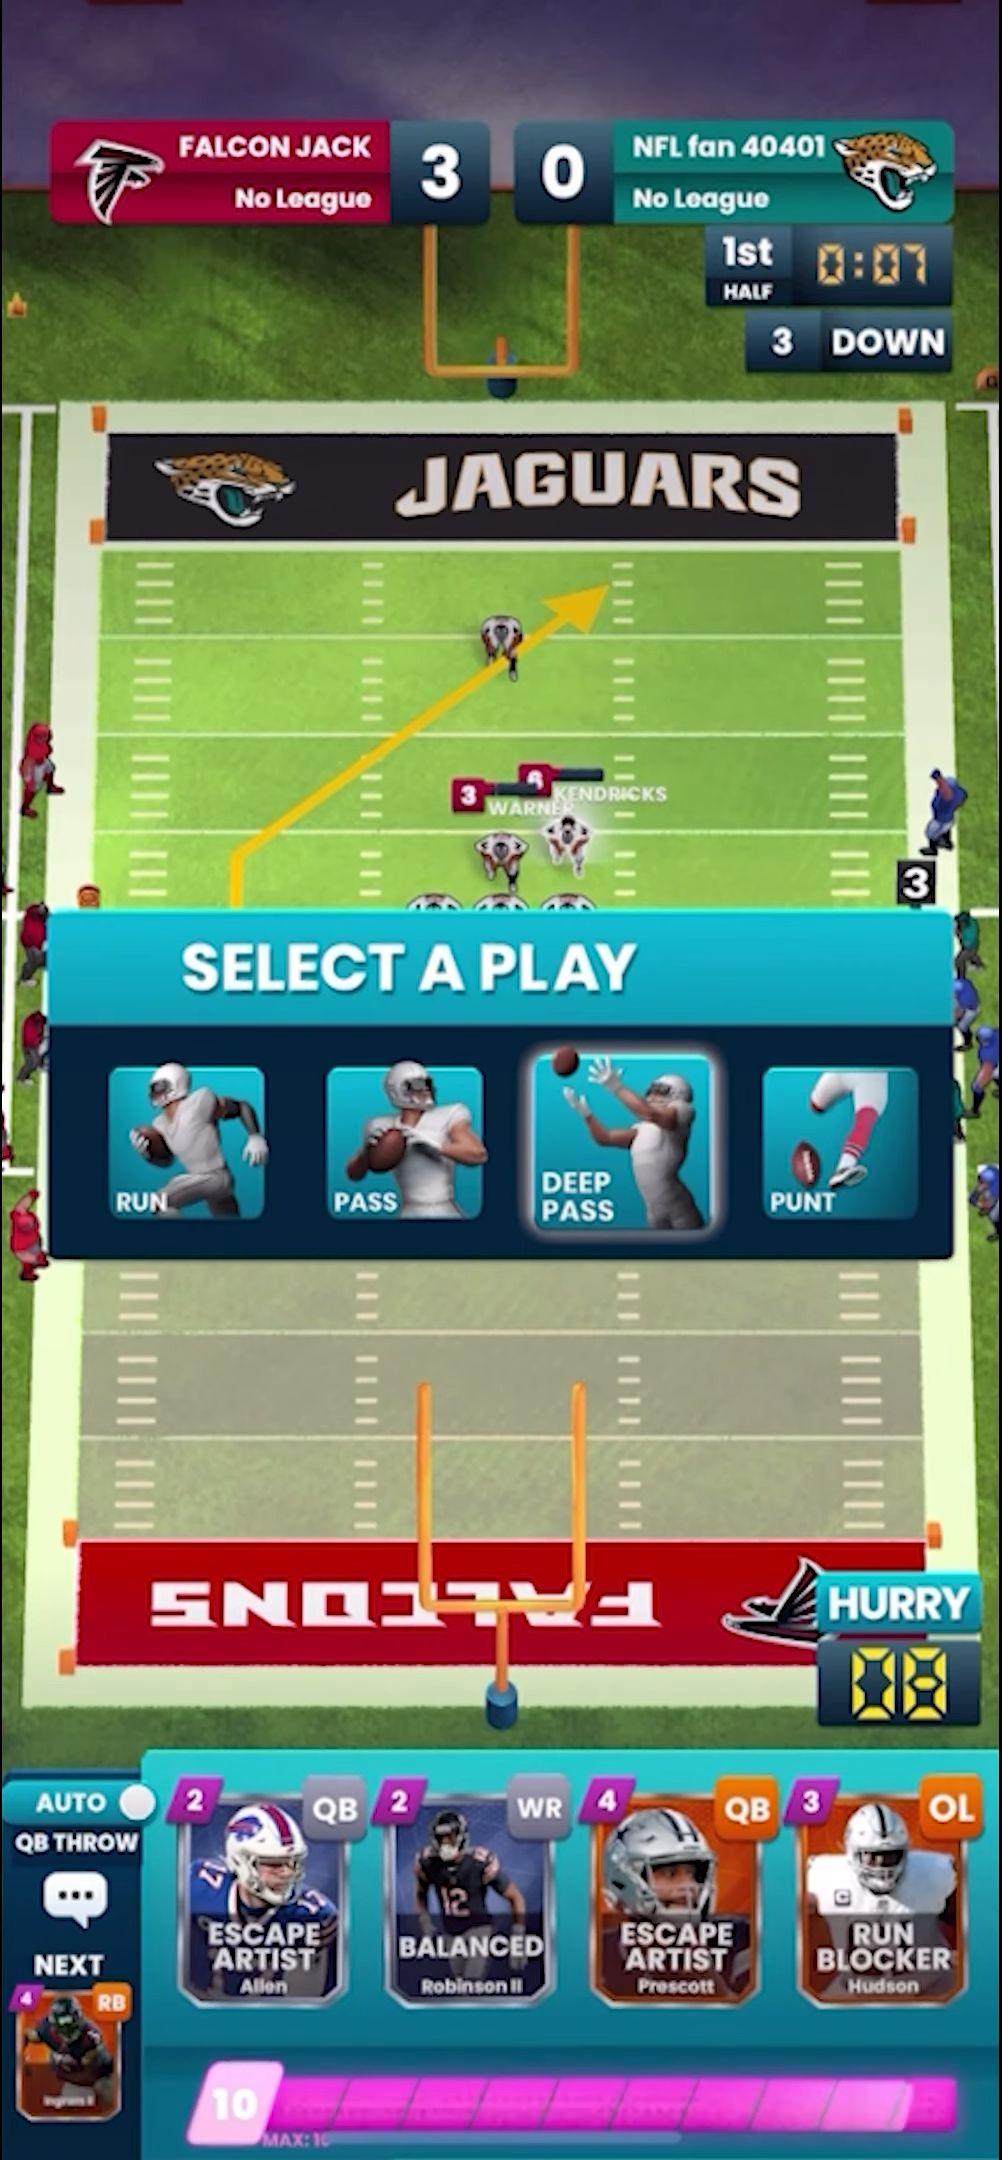 NFL Clash for Android